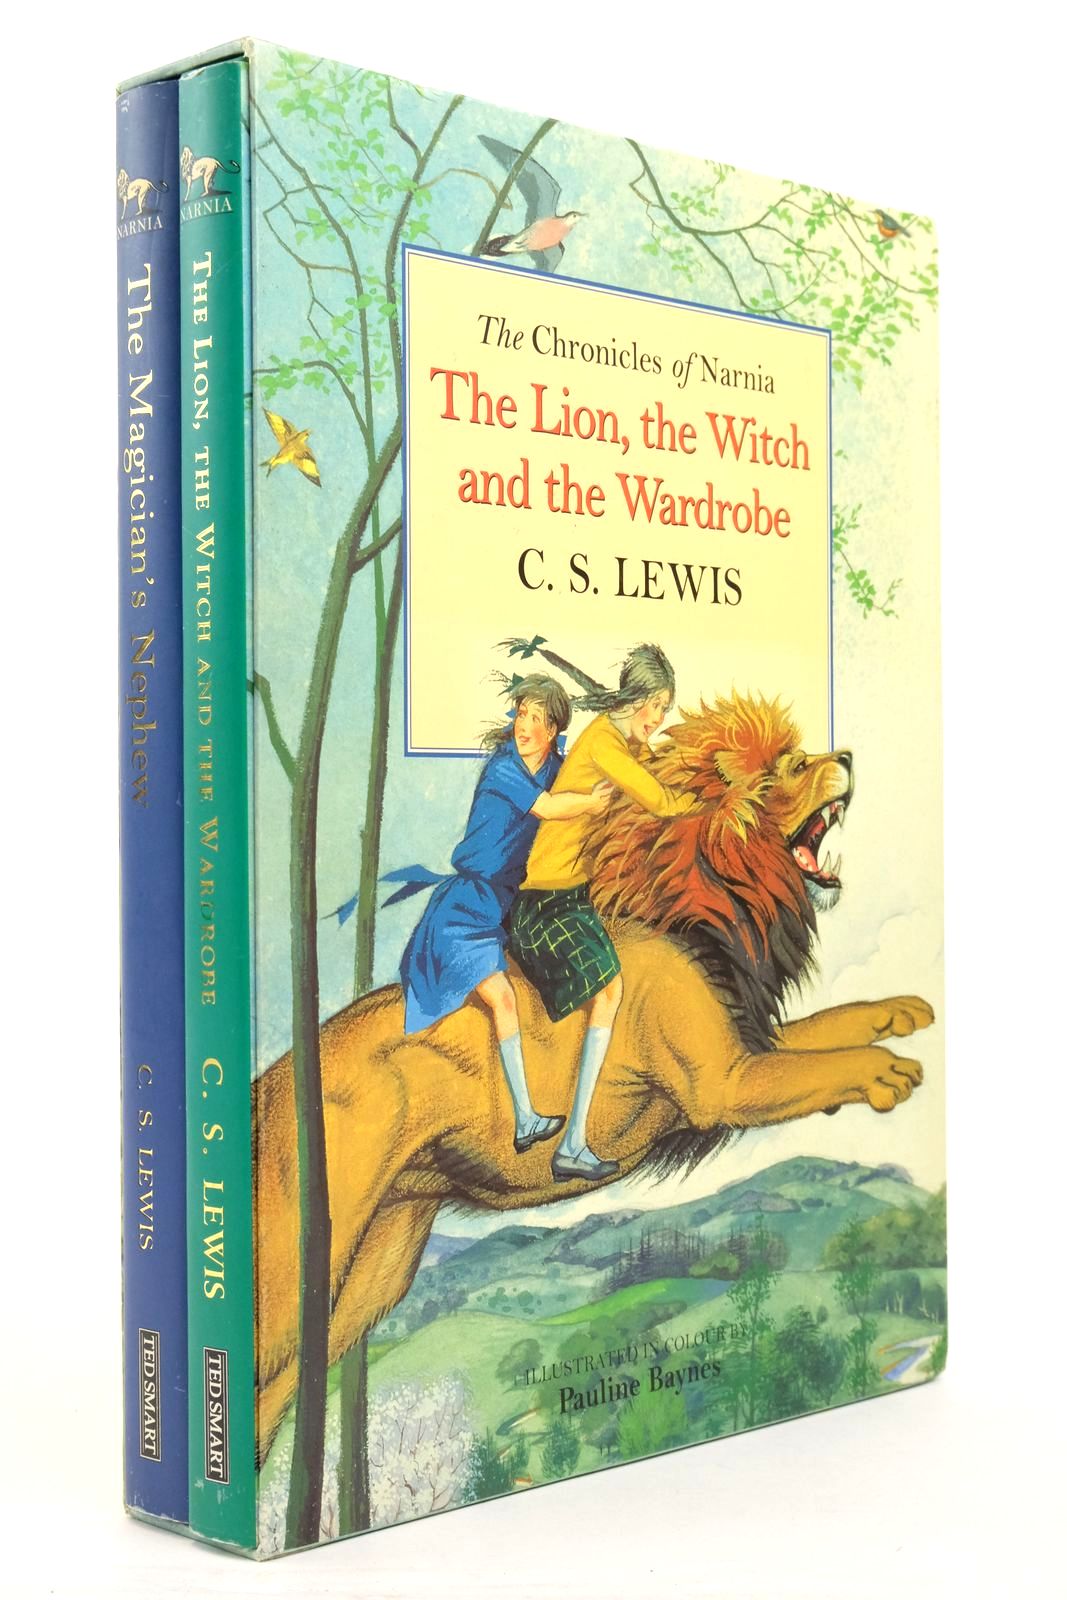 Photo of THE CHRONICLES OF NARNIA written by Lewis, C.S. illustrated by Baynes, Pauline published by Ted Smart (STOCK CODE: 2137765)  for sale by Stella & Rose's Books